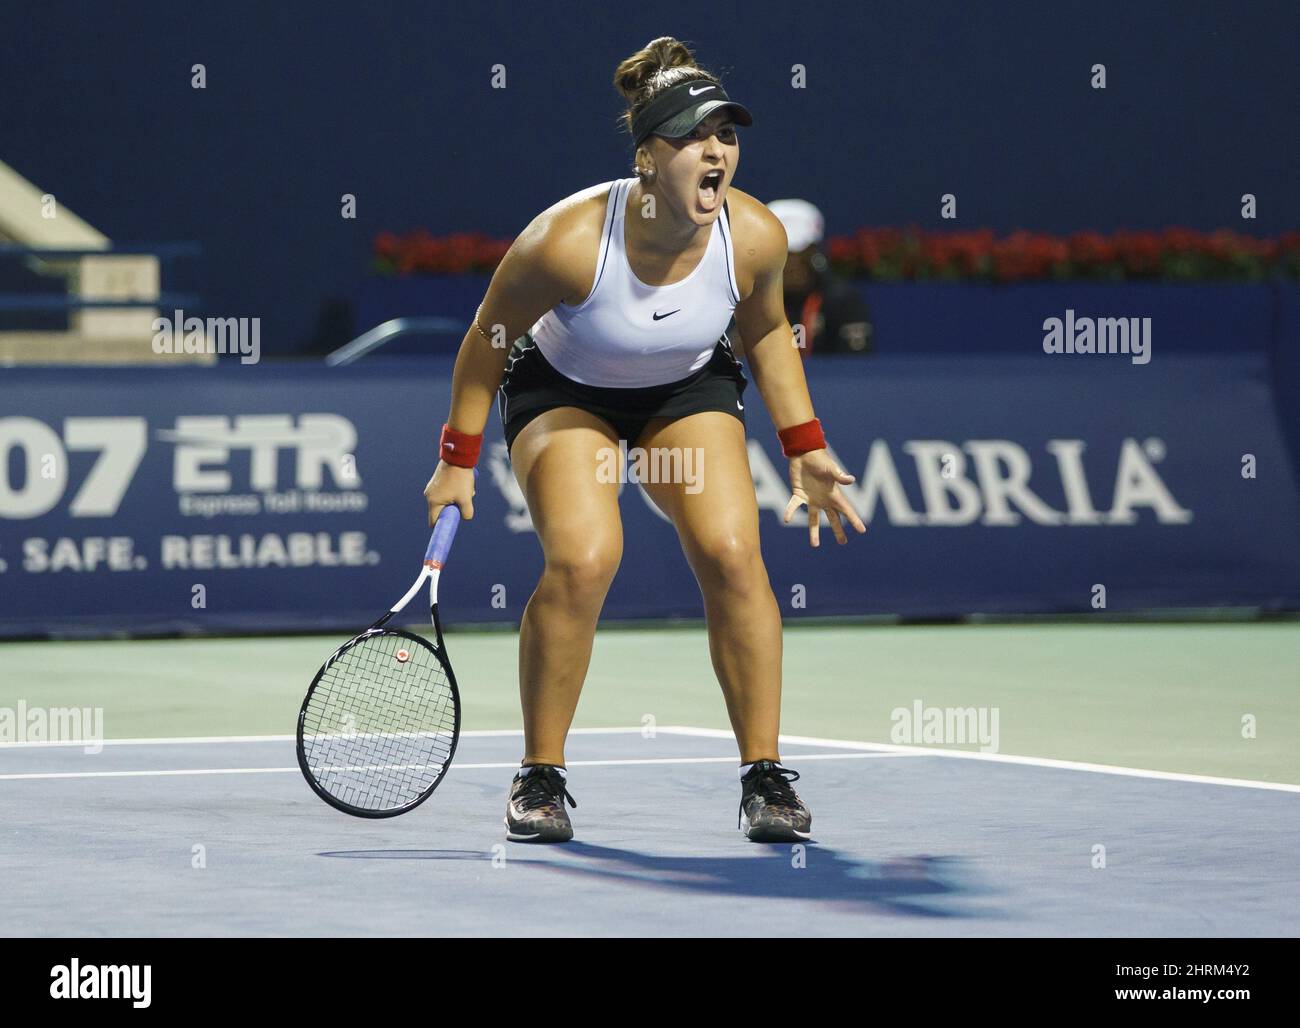 Bianca Andreescu of Canada reacts to scoring against Eugenie Bouchard  during round 1 of the Rogers Cup Women's tennis tournament in Toronto,  Tuesday August 6, 2019. THE CANADIAN PRESS/Mark Blinch Stock Photo - Alamy